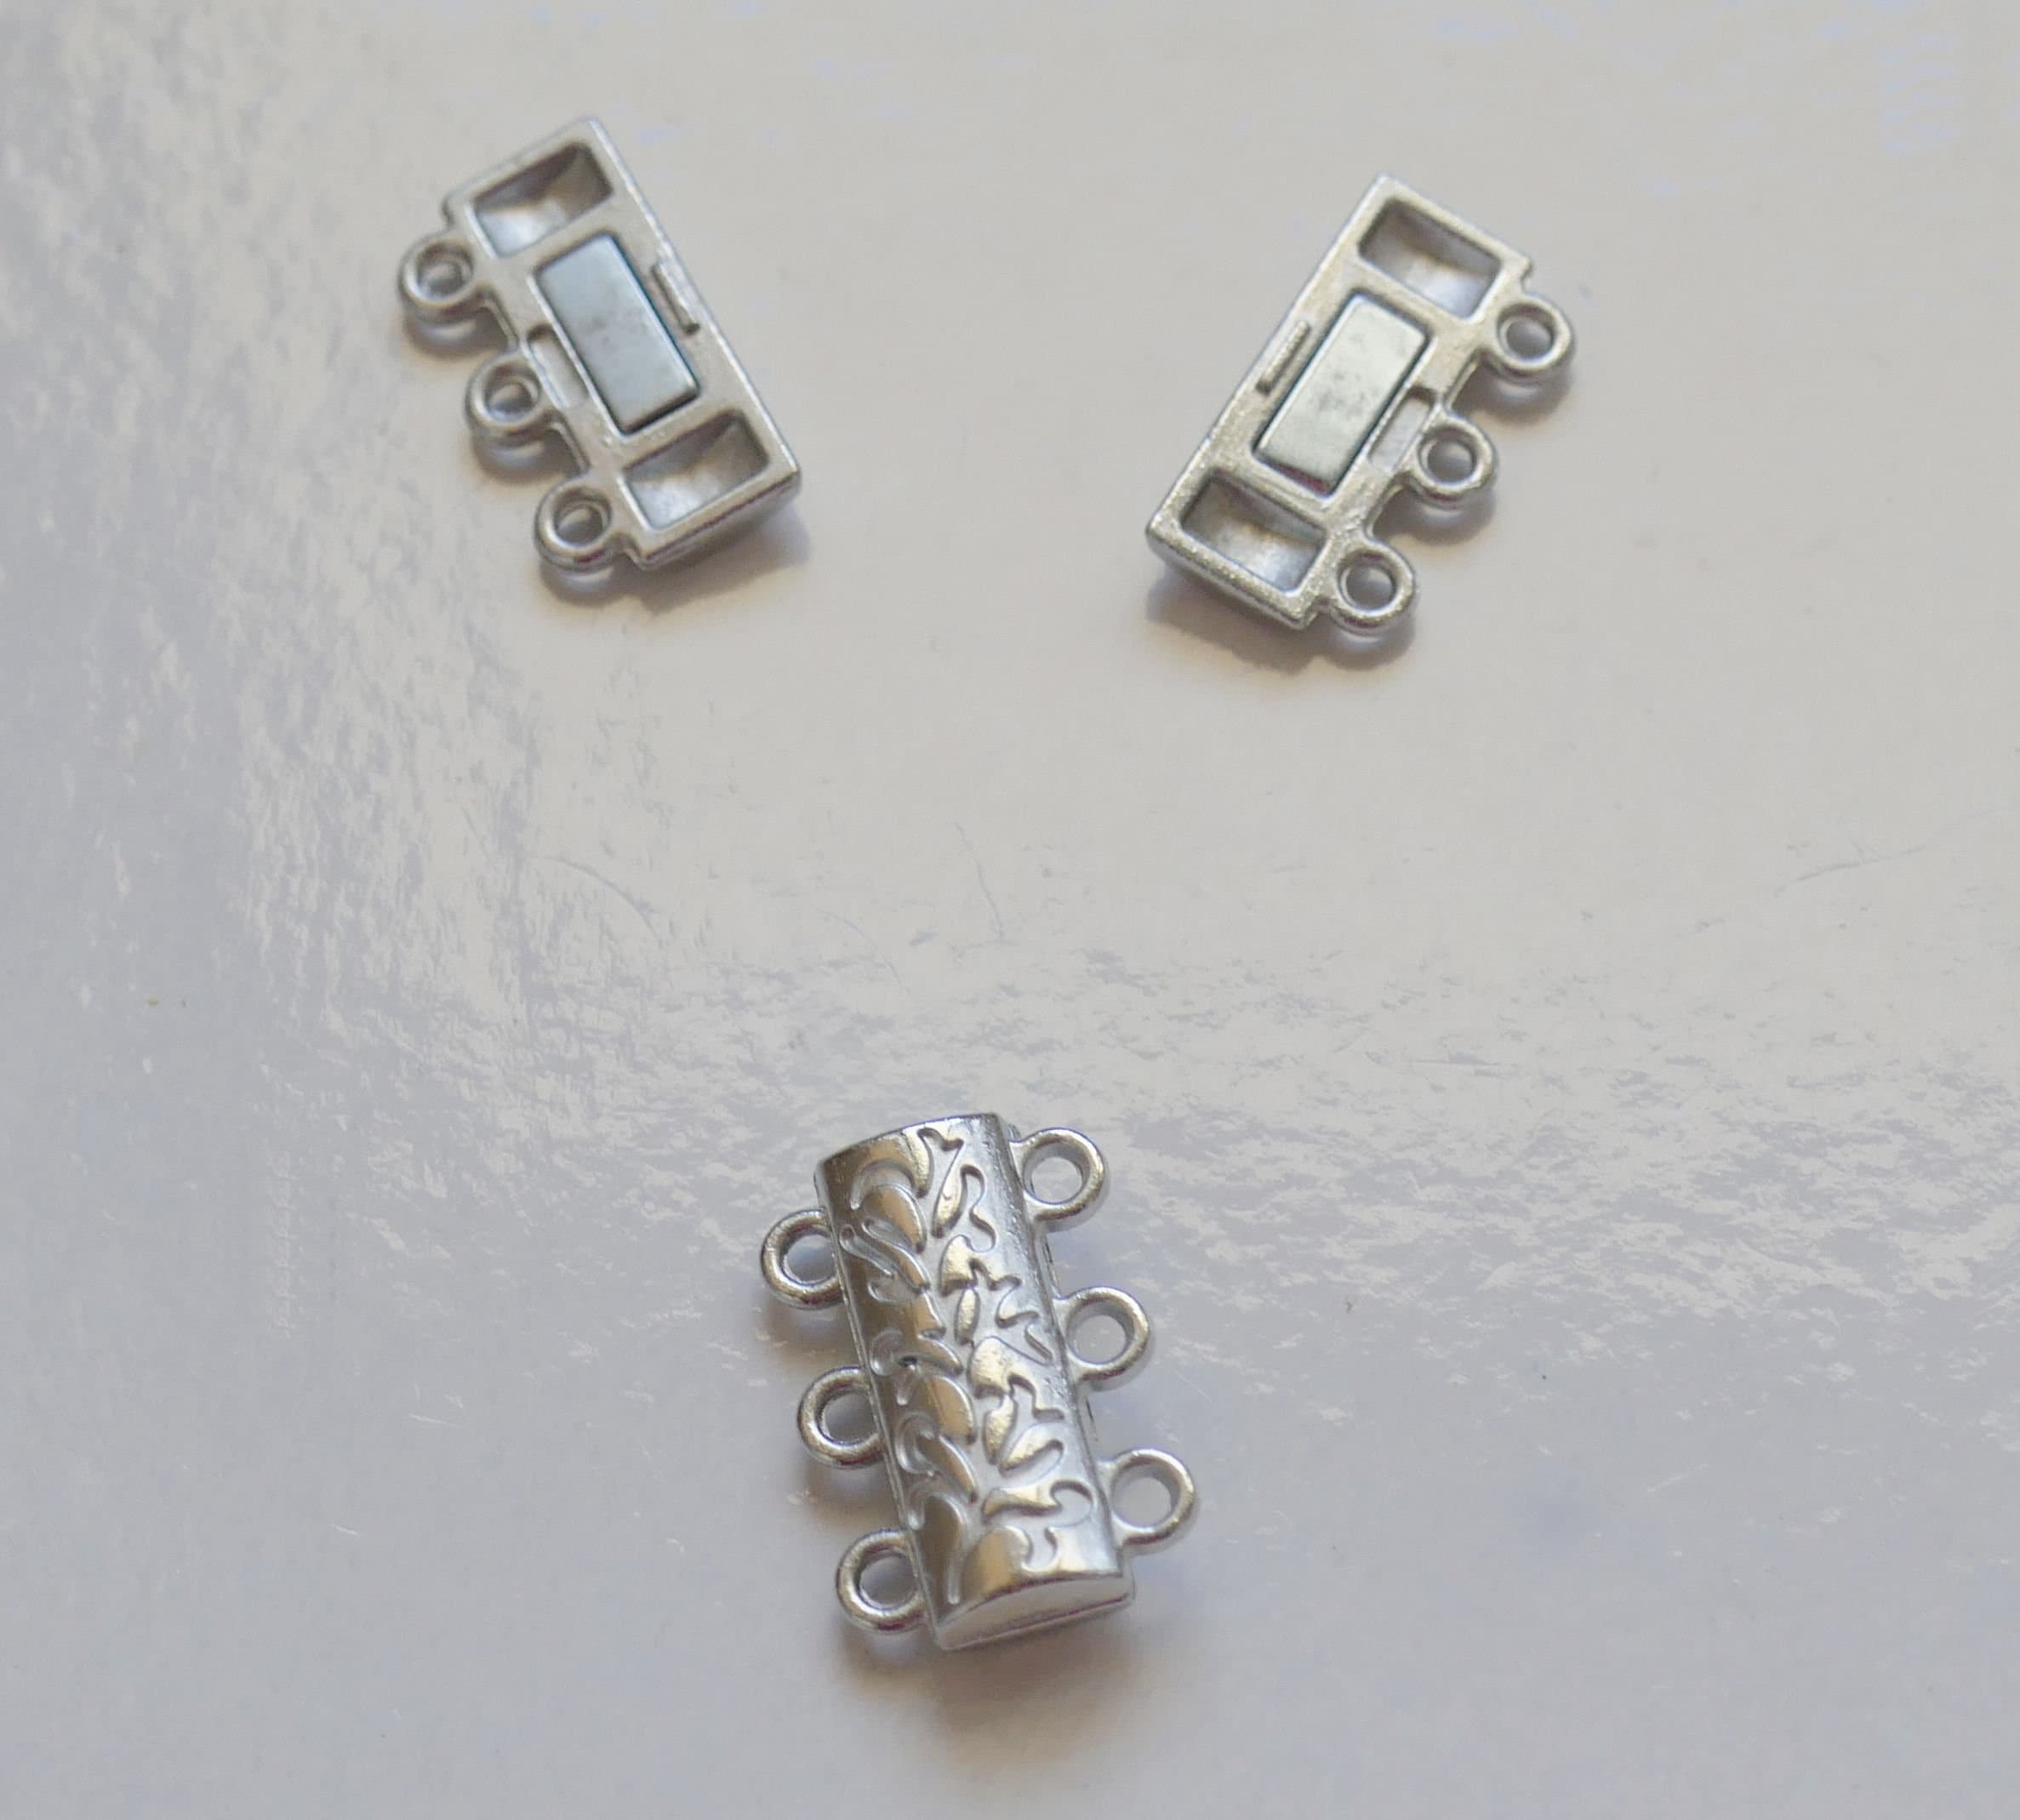 Wholesale Magnetic Clasps - (Strong and Secure jewelry closures)